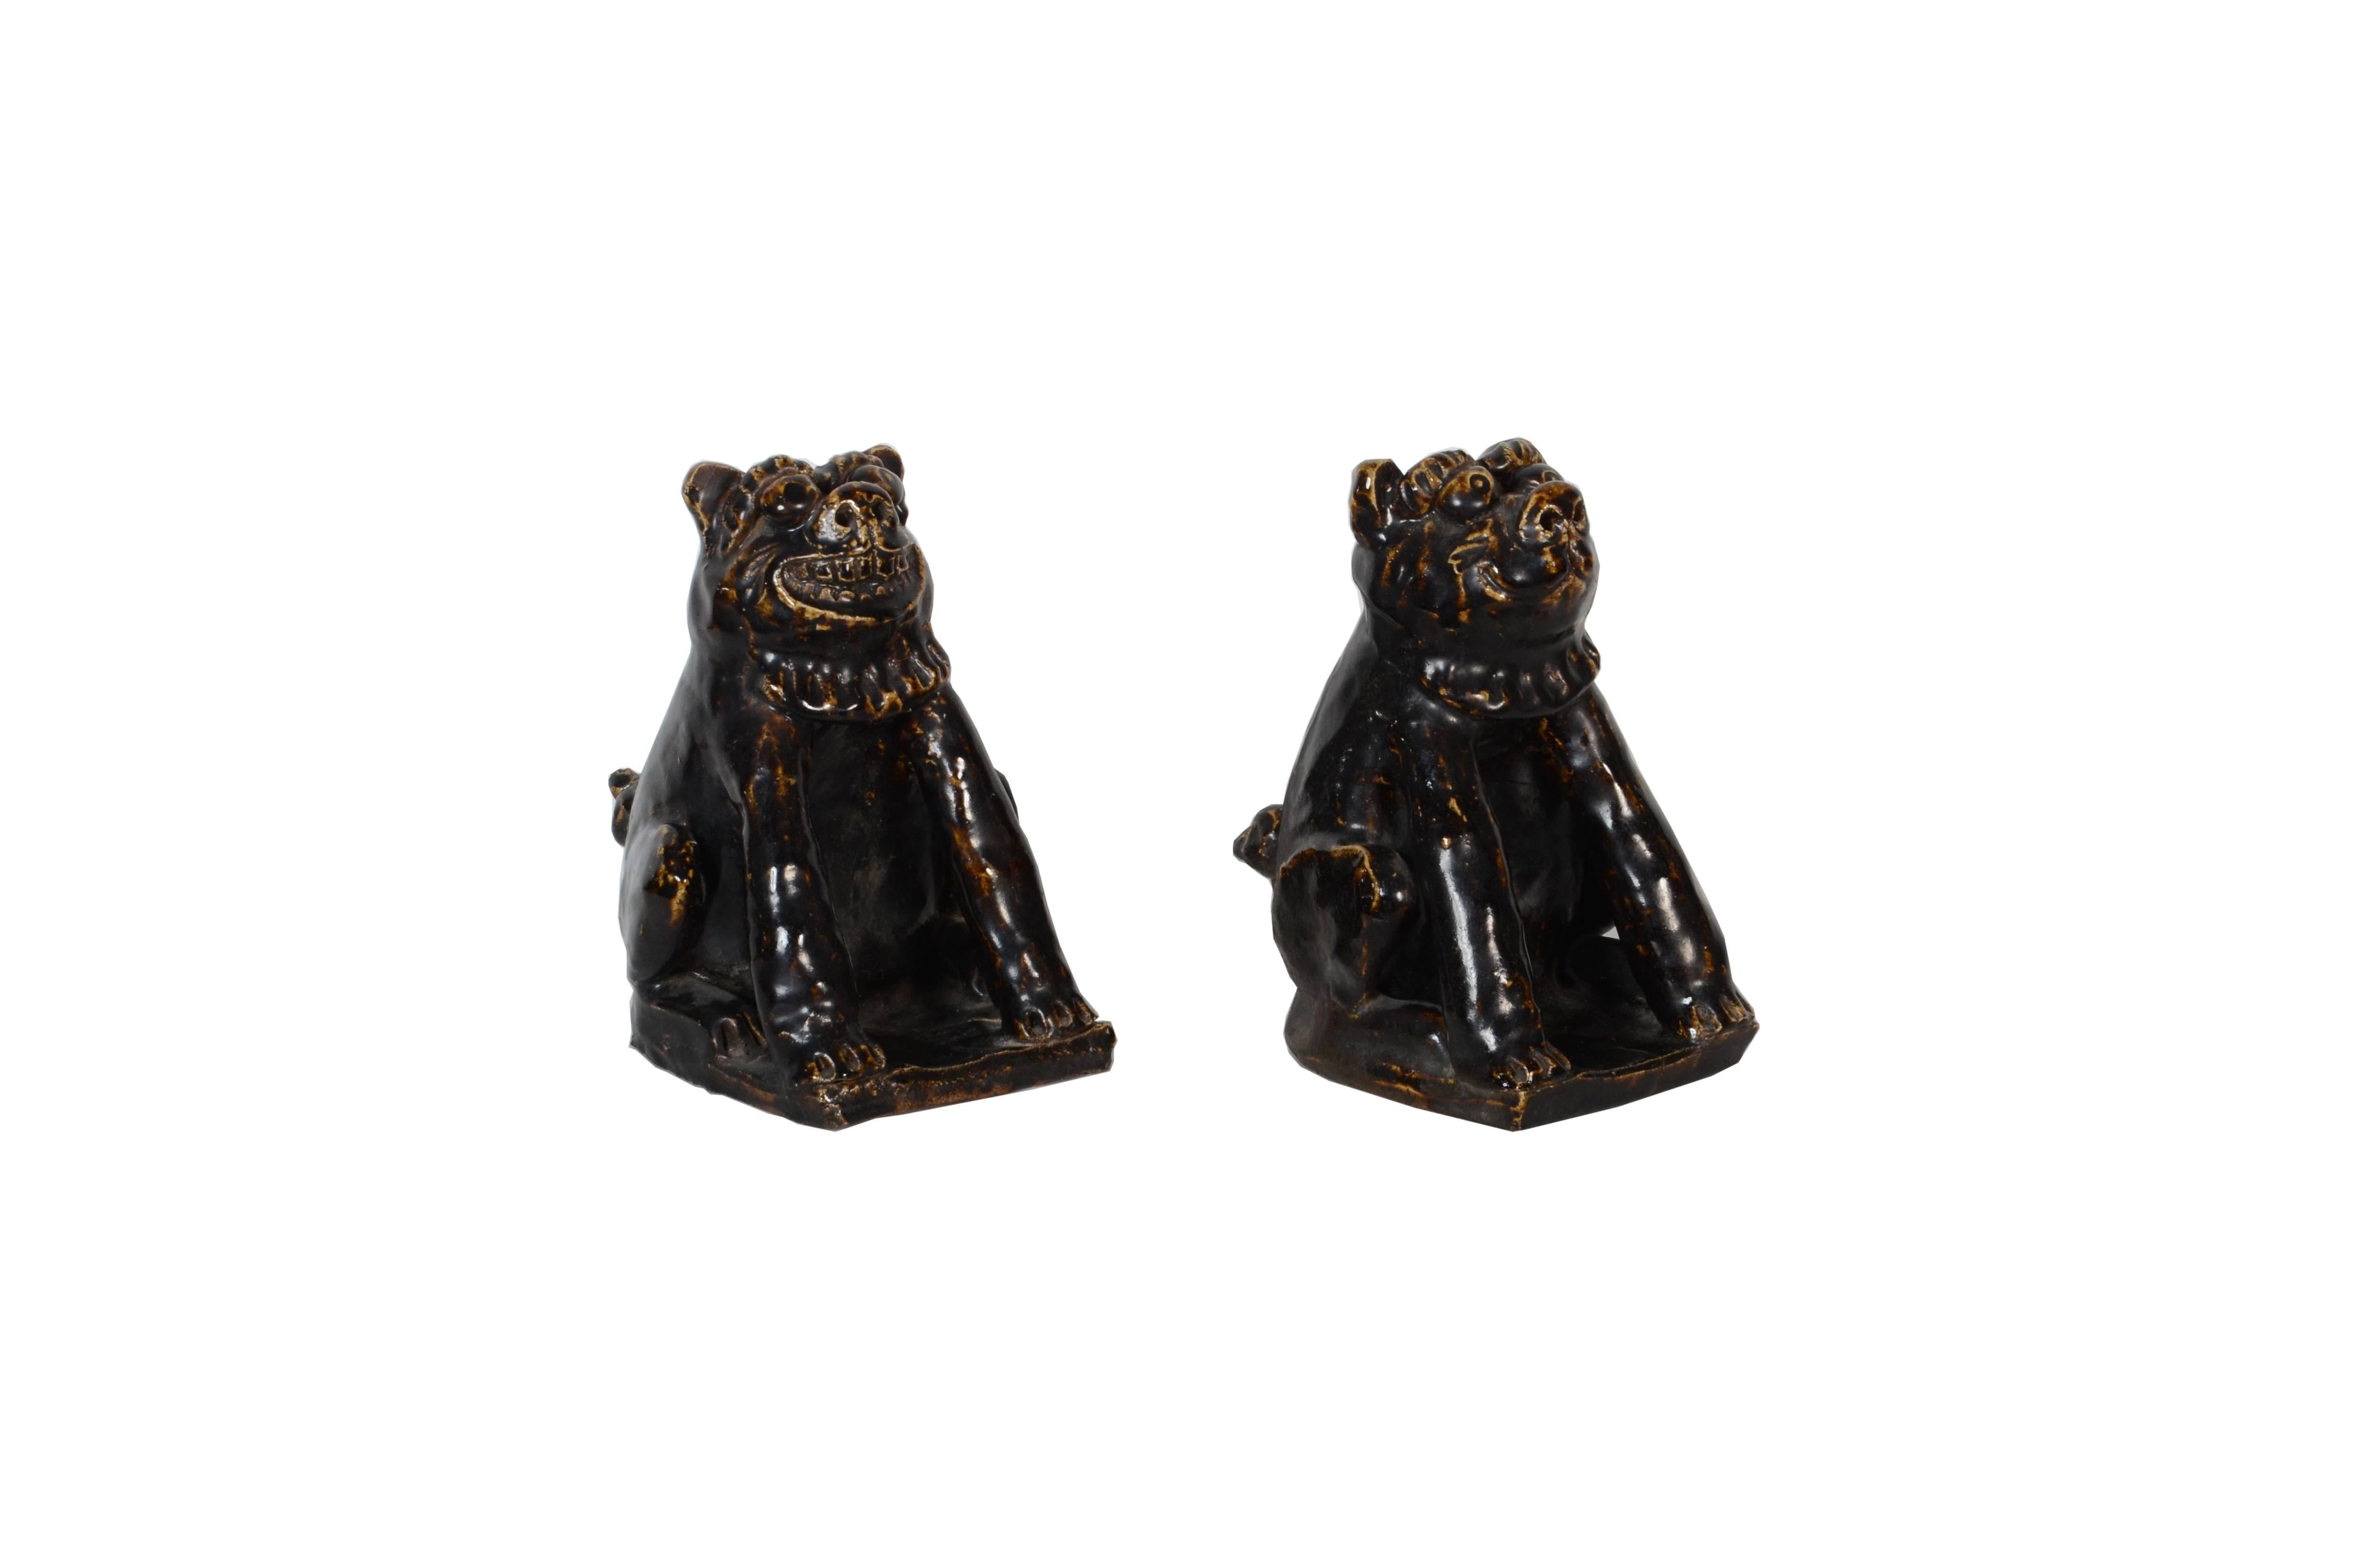 Rare pair of Japanese Folk Art Seto pottery shishi Buddhist guardian dogs glazed in a dark greenish brown toned glaze, late Meiji period

Acknowledged fault: numerous minor firing cracks across surface of both figures, with one large firing crack